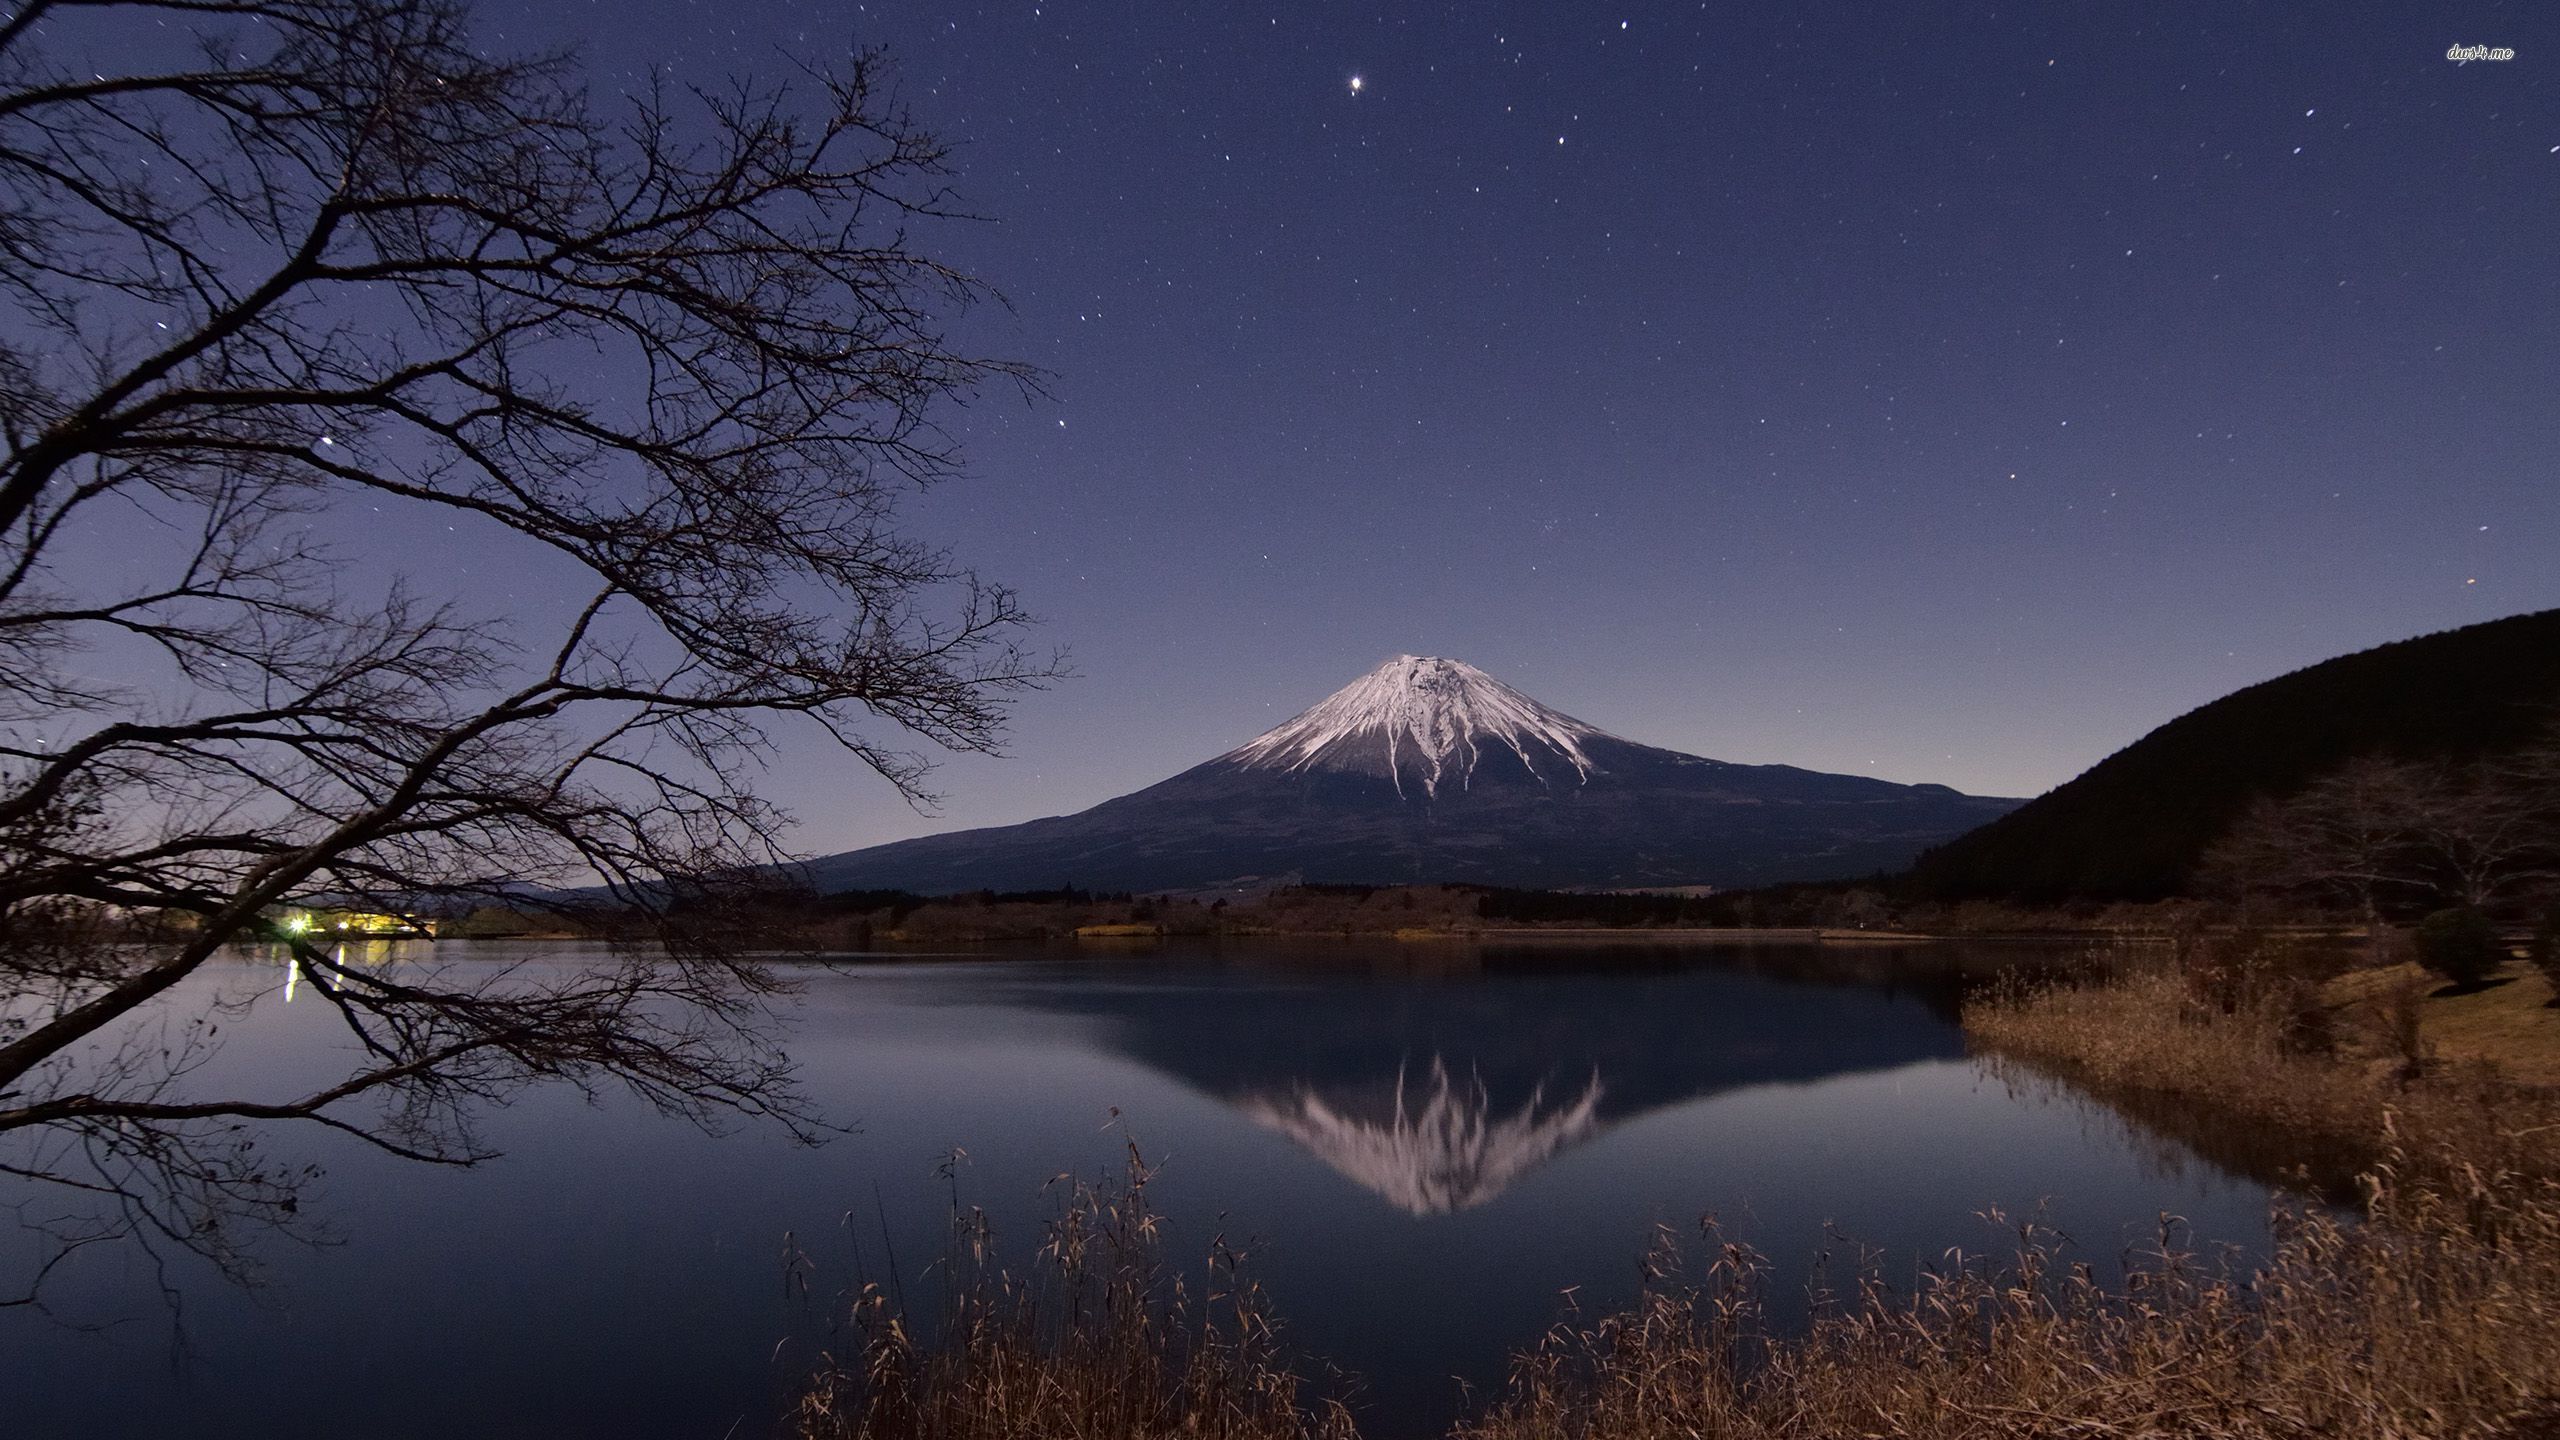 Mount Fuji Wallpaper Posted By Sarah Peltier